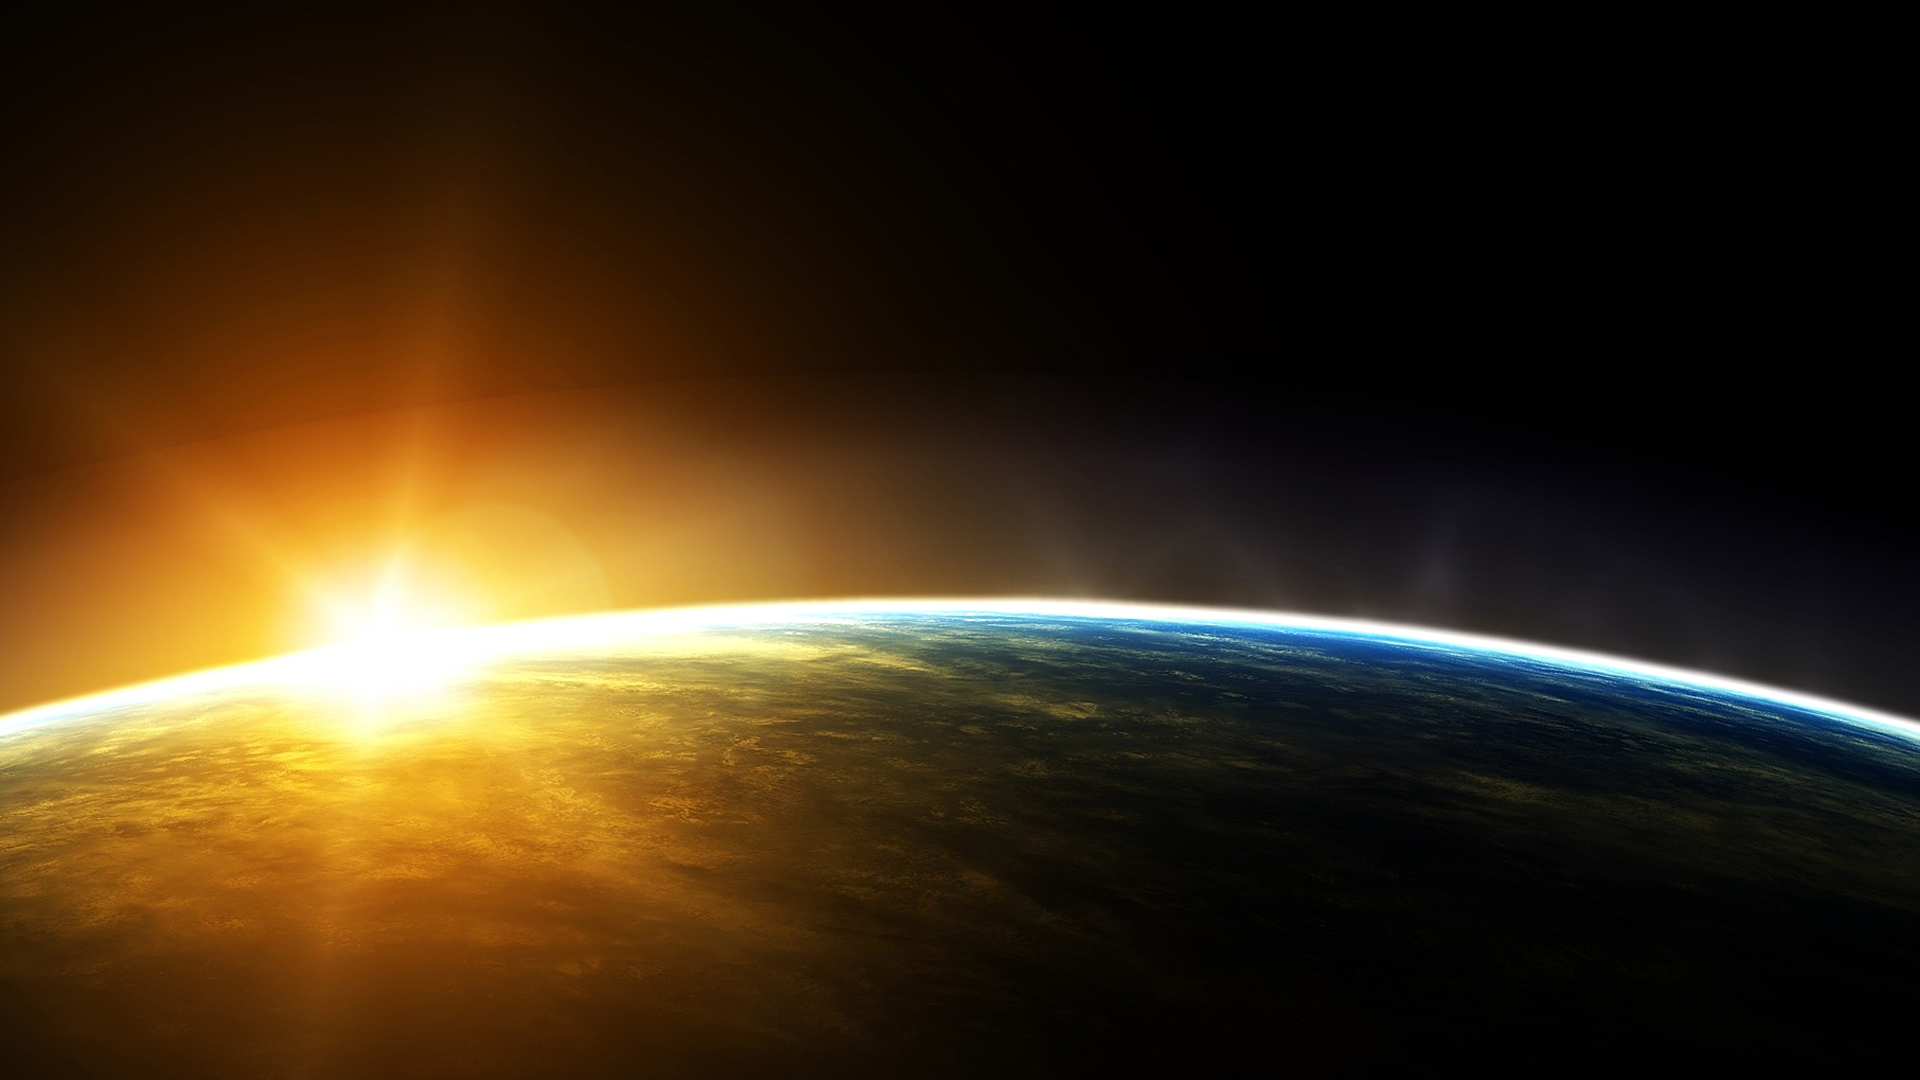  top wallpaper wallpapers sunrise earth black background worlds 1920x1080